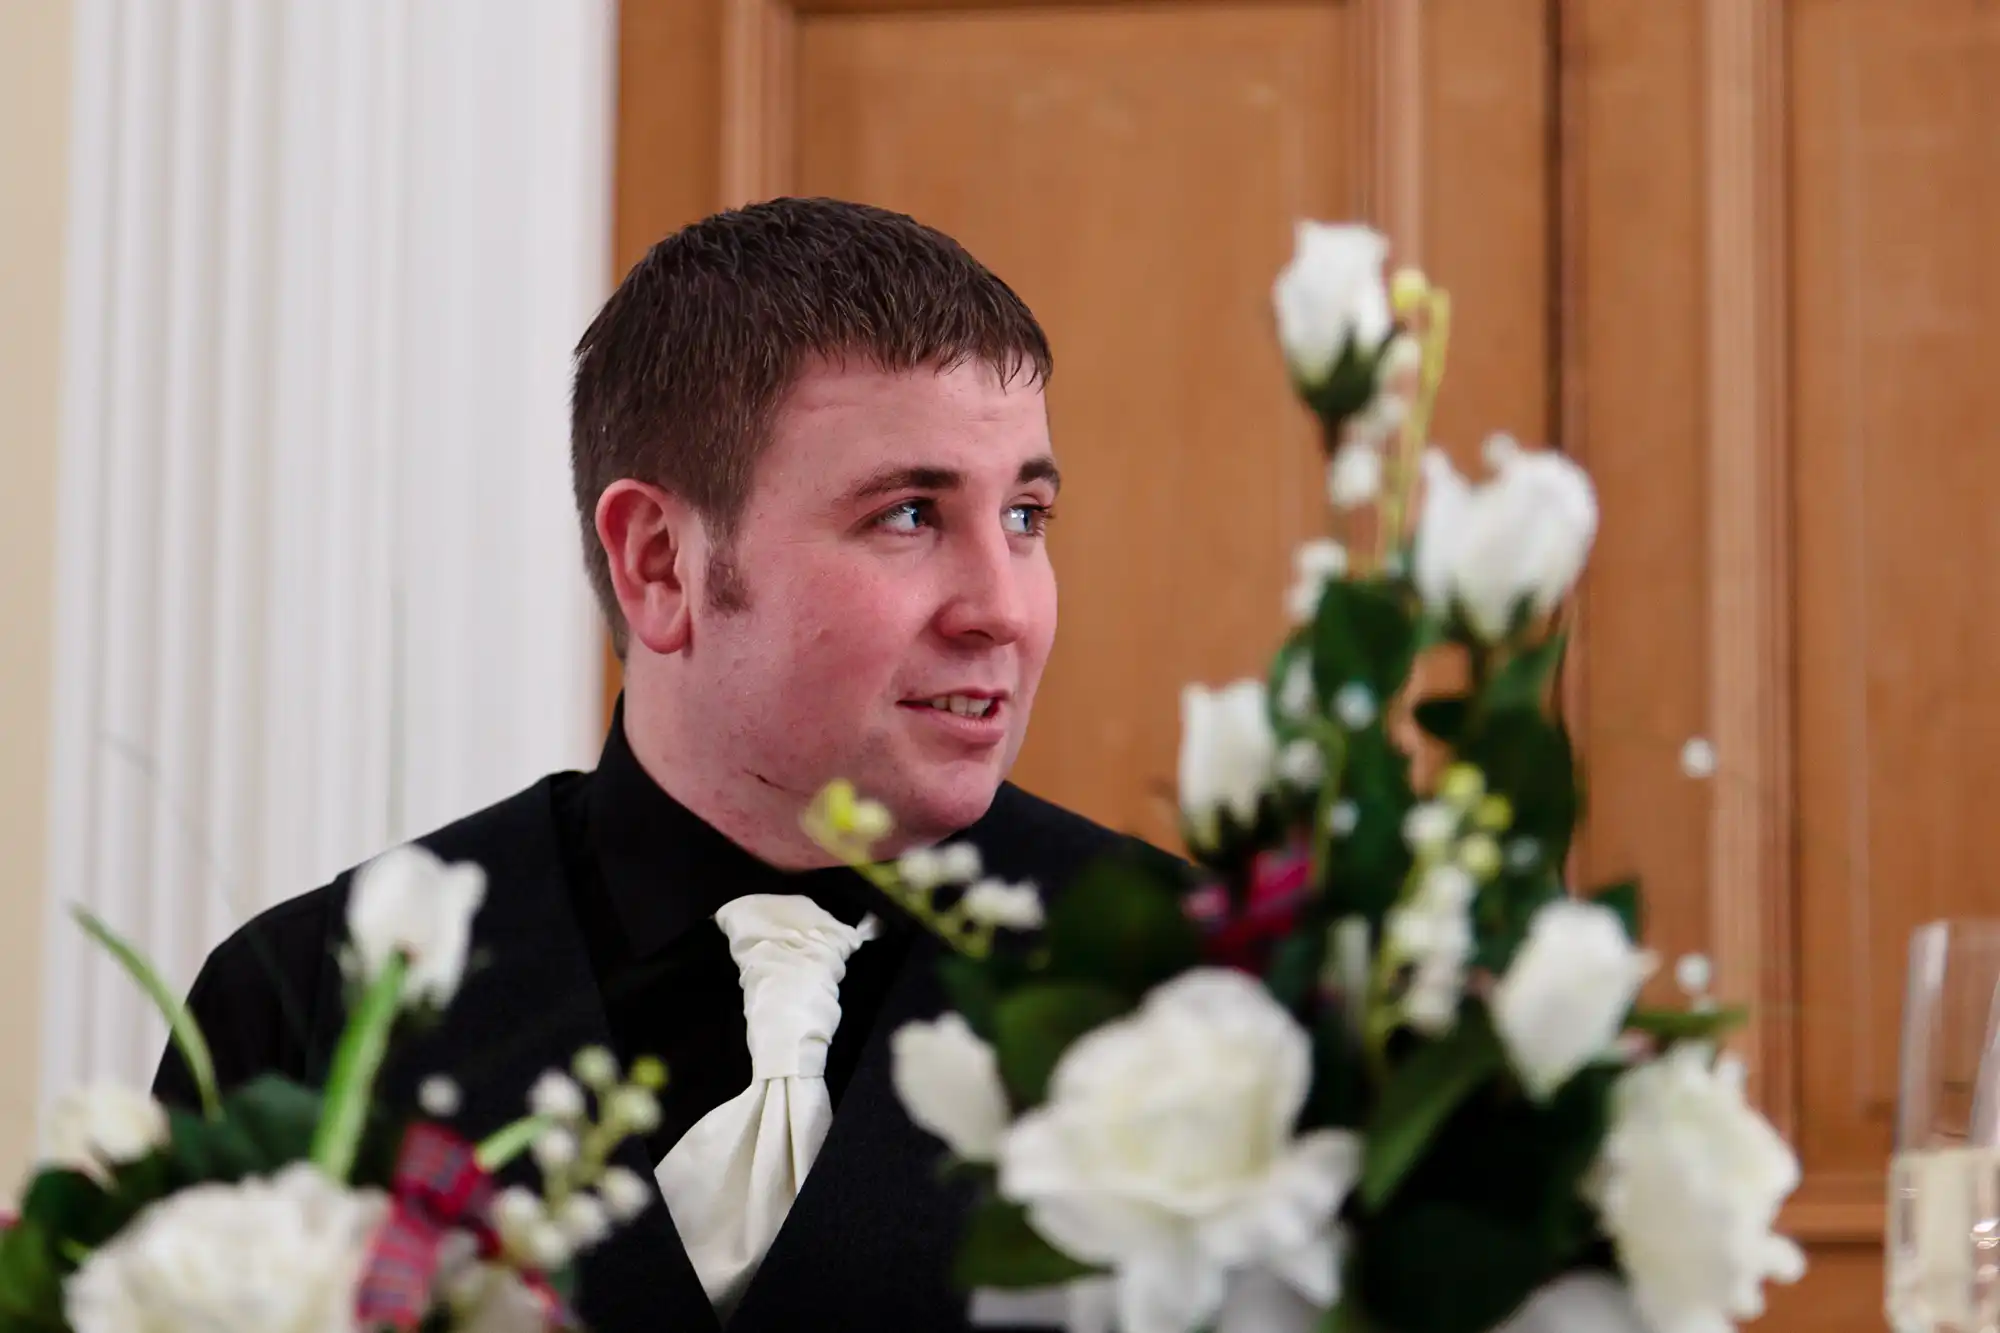 Man in a black tuxedo sitting at a table, smiling slightly and looking to the side, with white roses in the foreground.